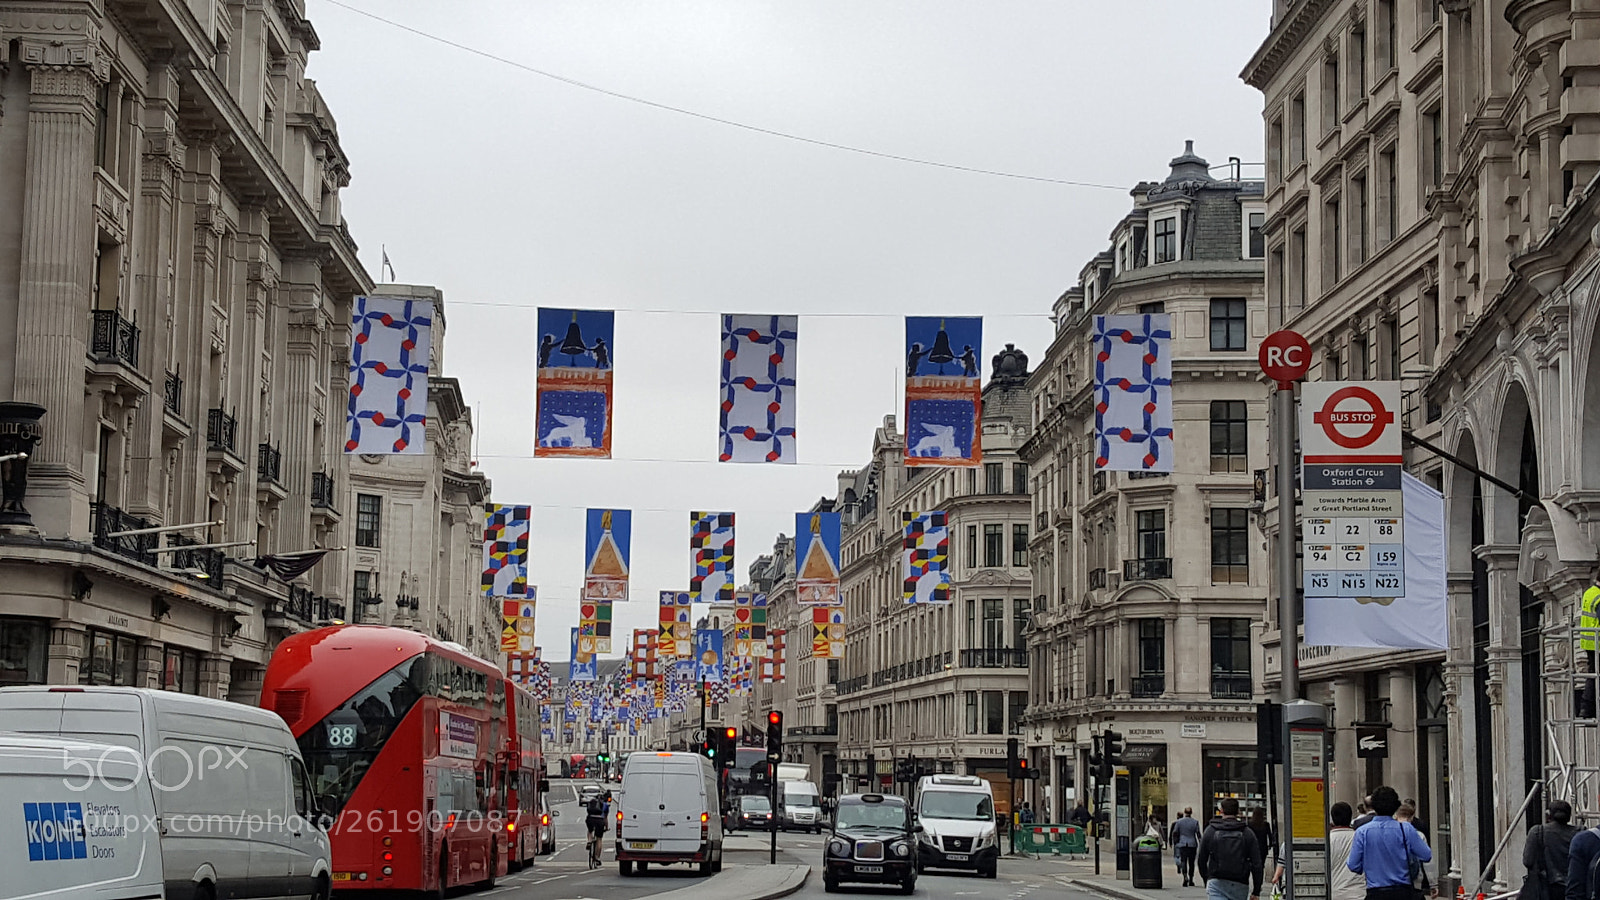 Samsung Galaxy S6 sample photo. Flags out on regent photography